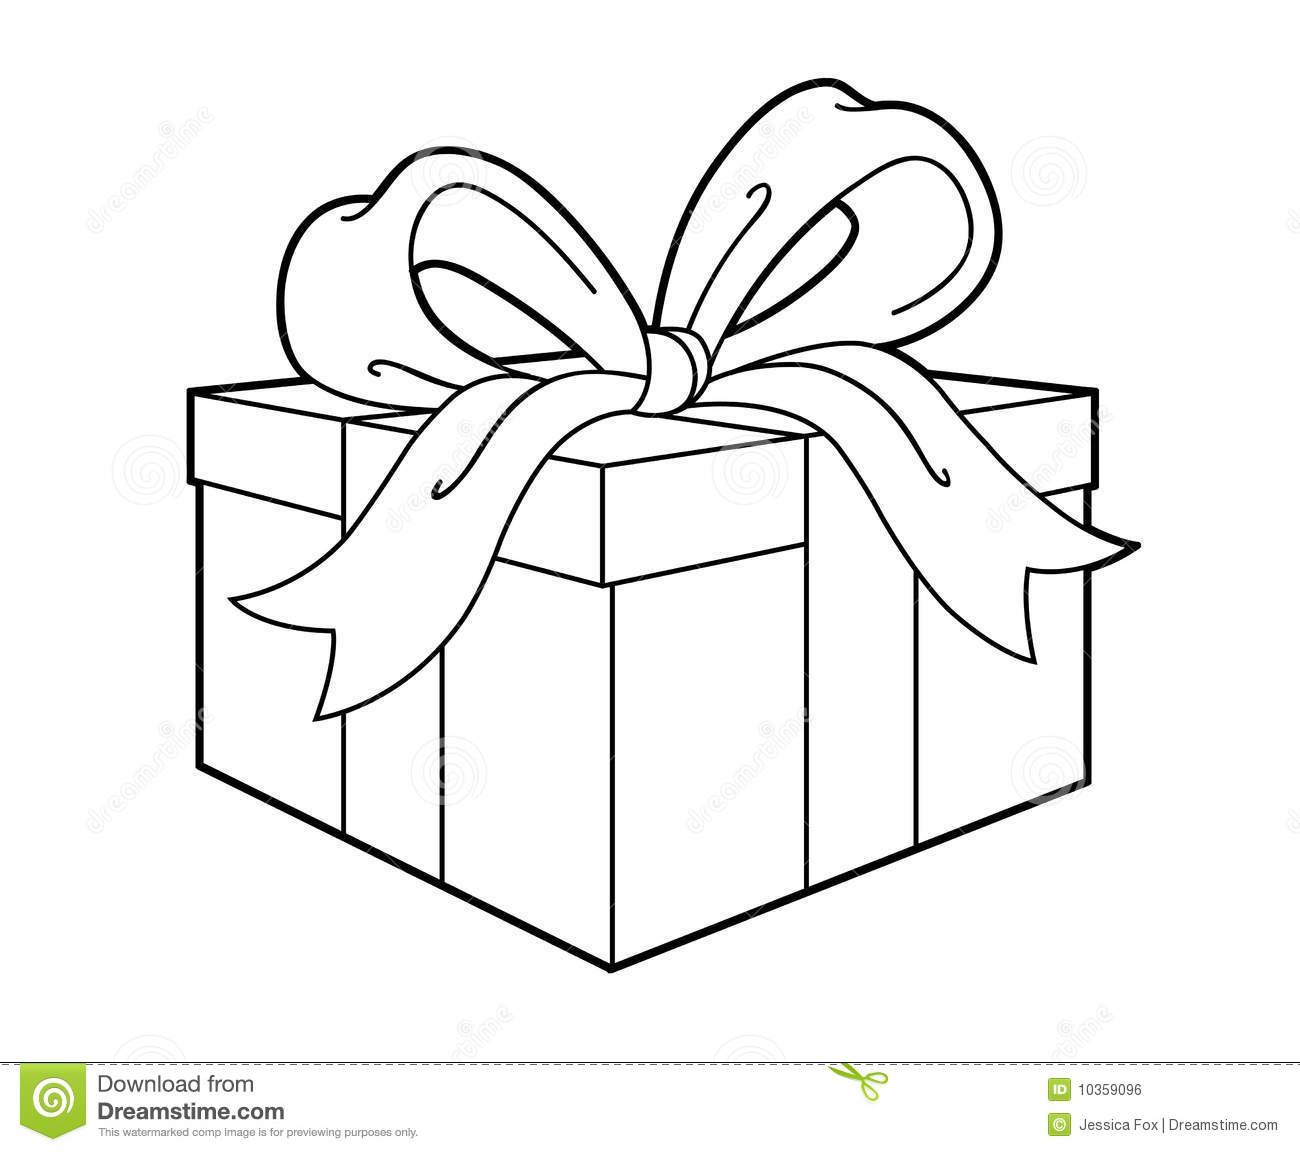 Simple Black Line Art Drawing Of A Present Or Gift  Colors Can Be